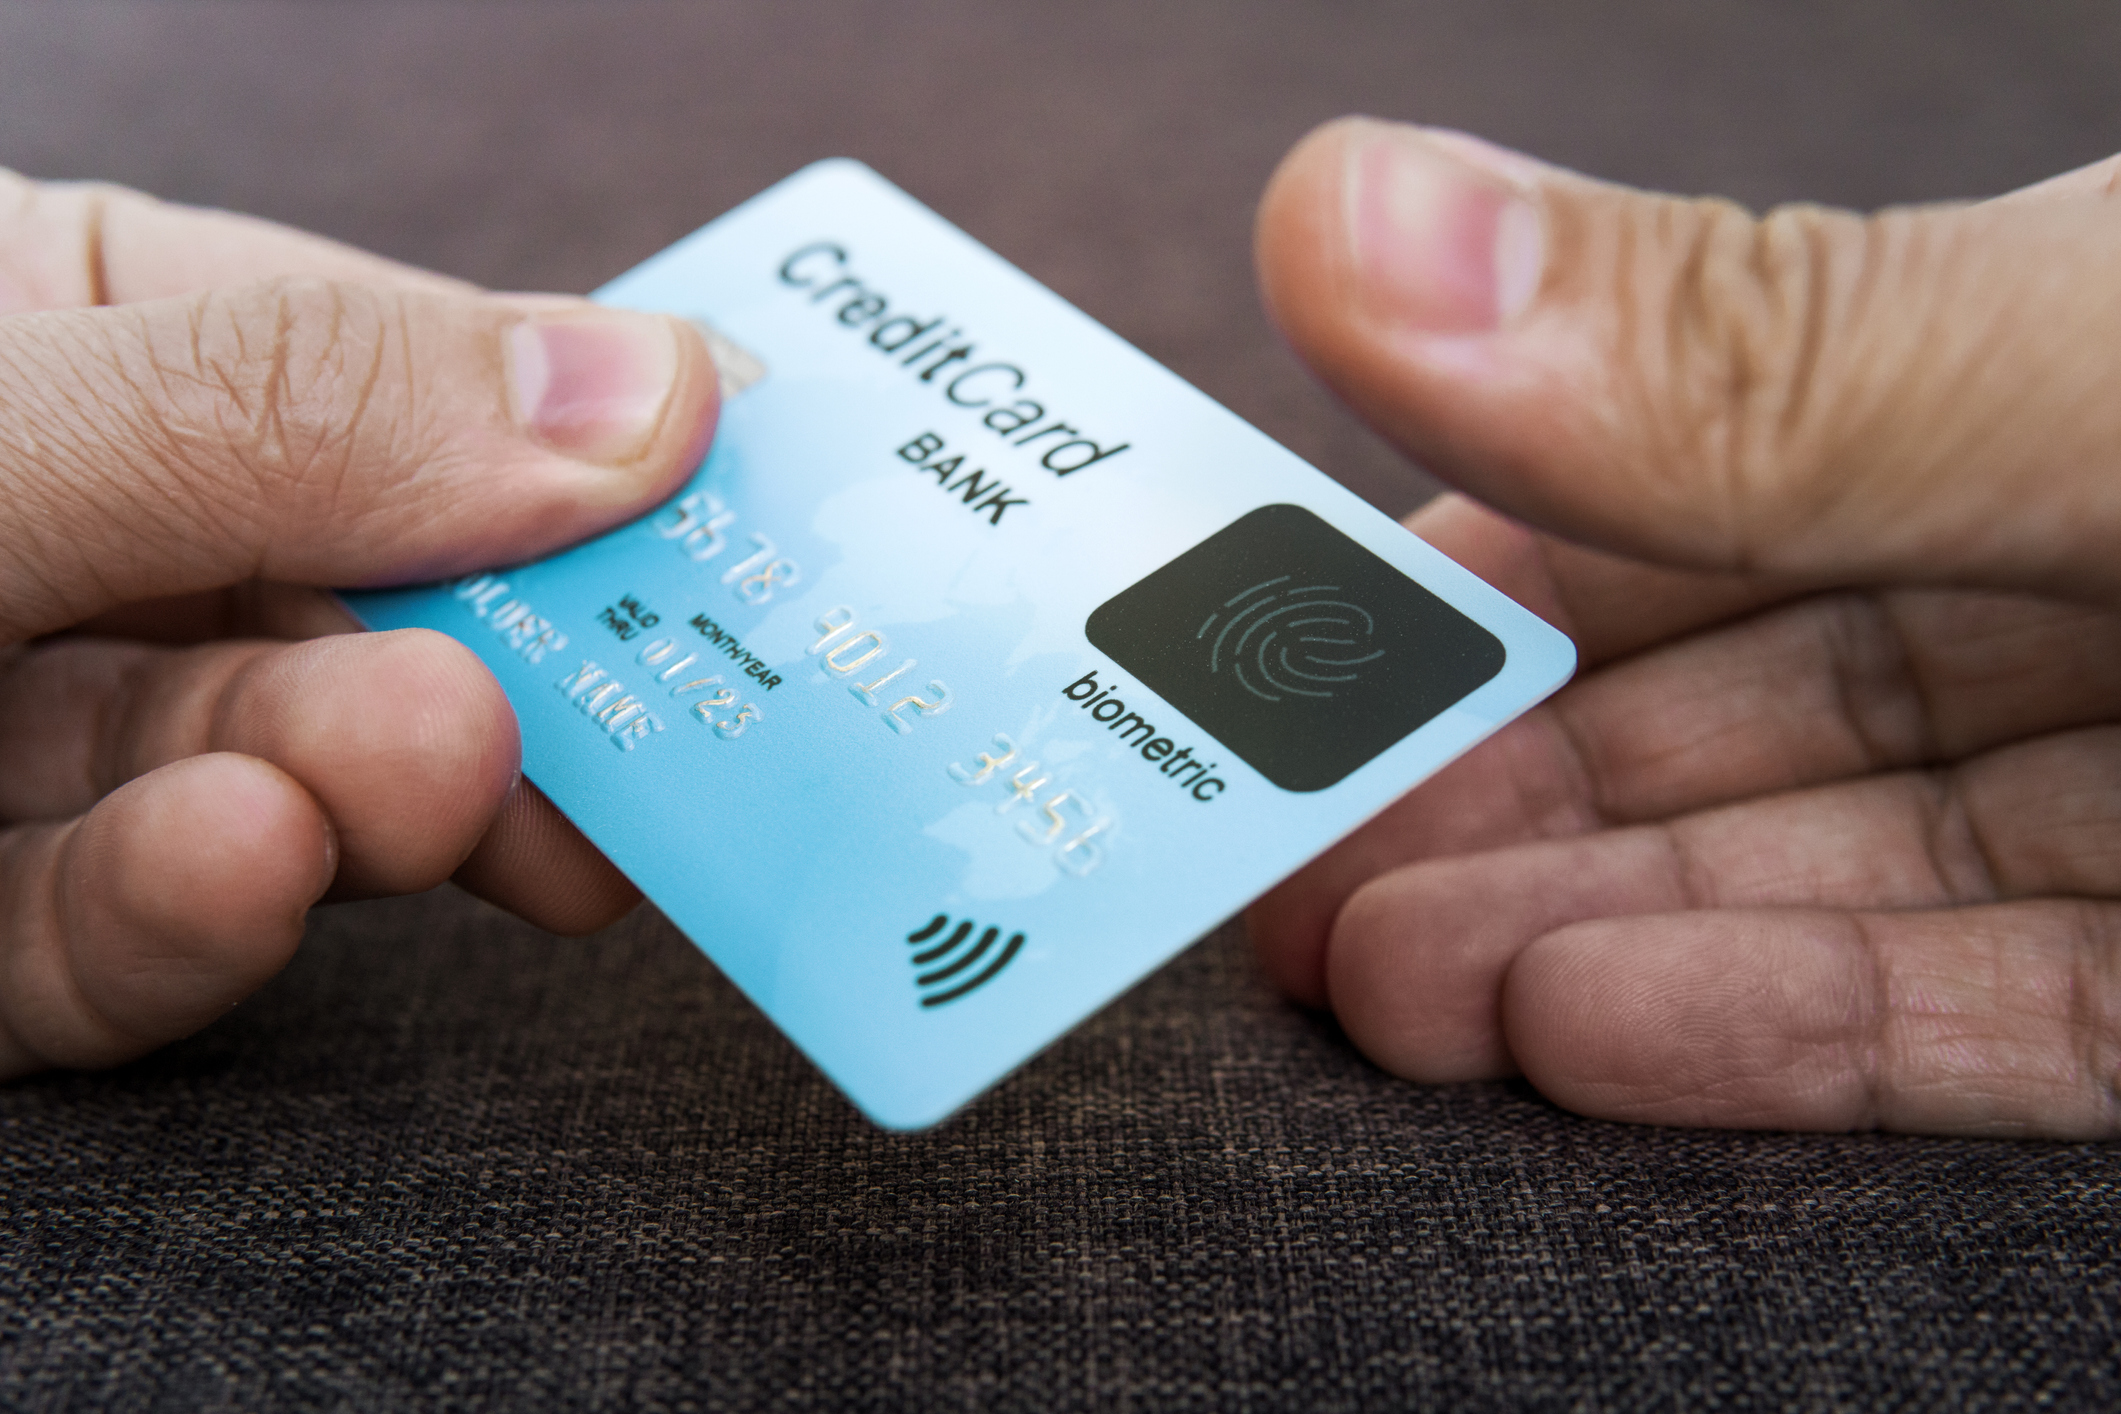 Credit card has built-in fingerprint scanner. Illustration of biometric payment security. One male hand is holding blue card and other touching scanner with thumb.